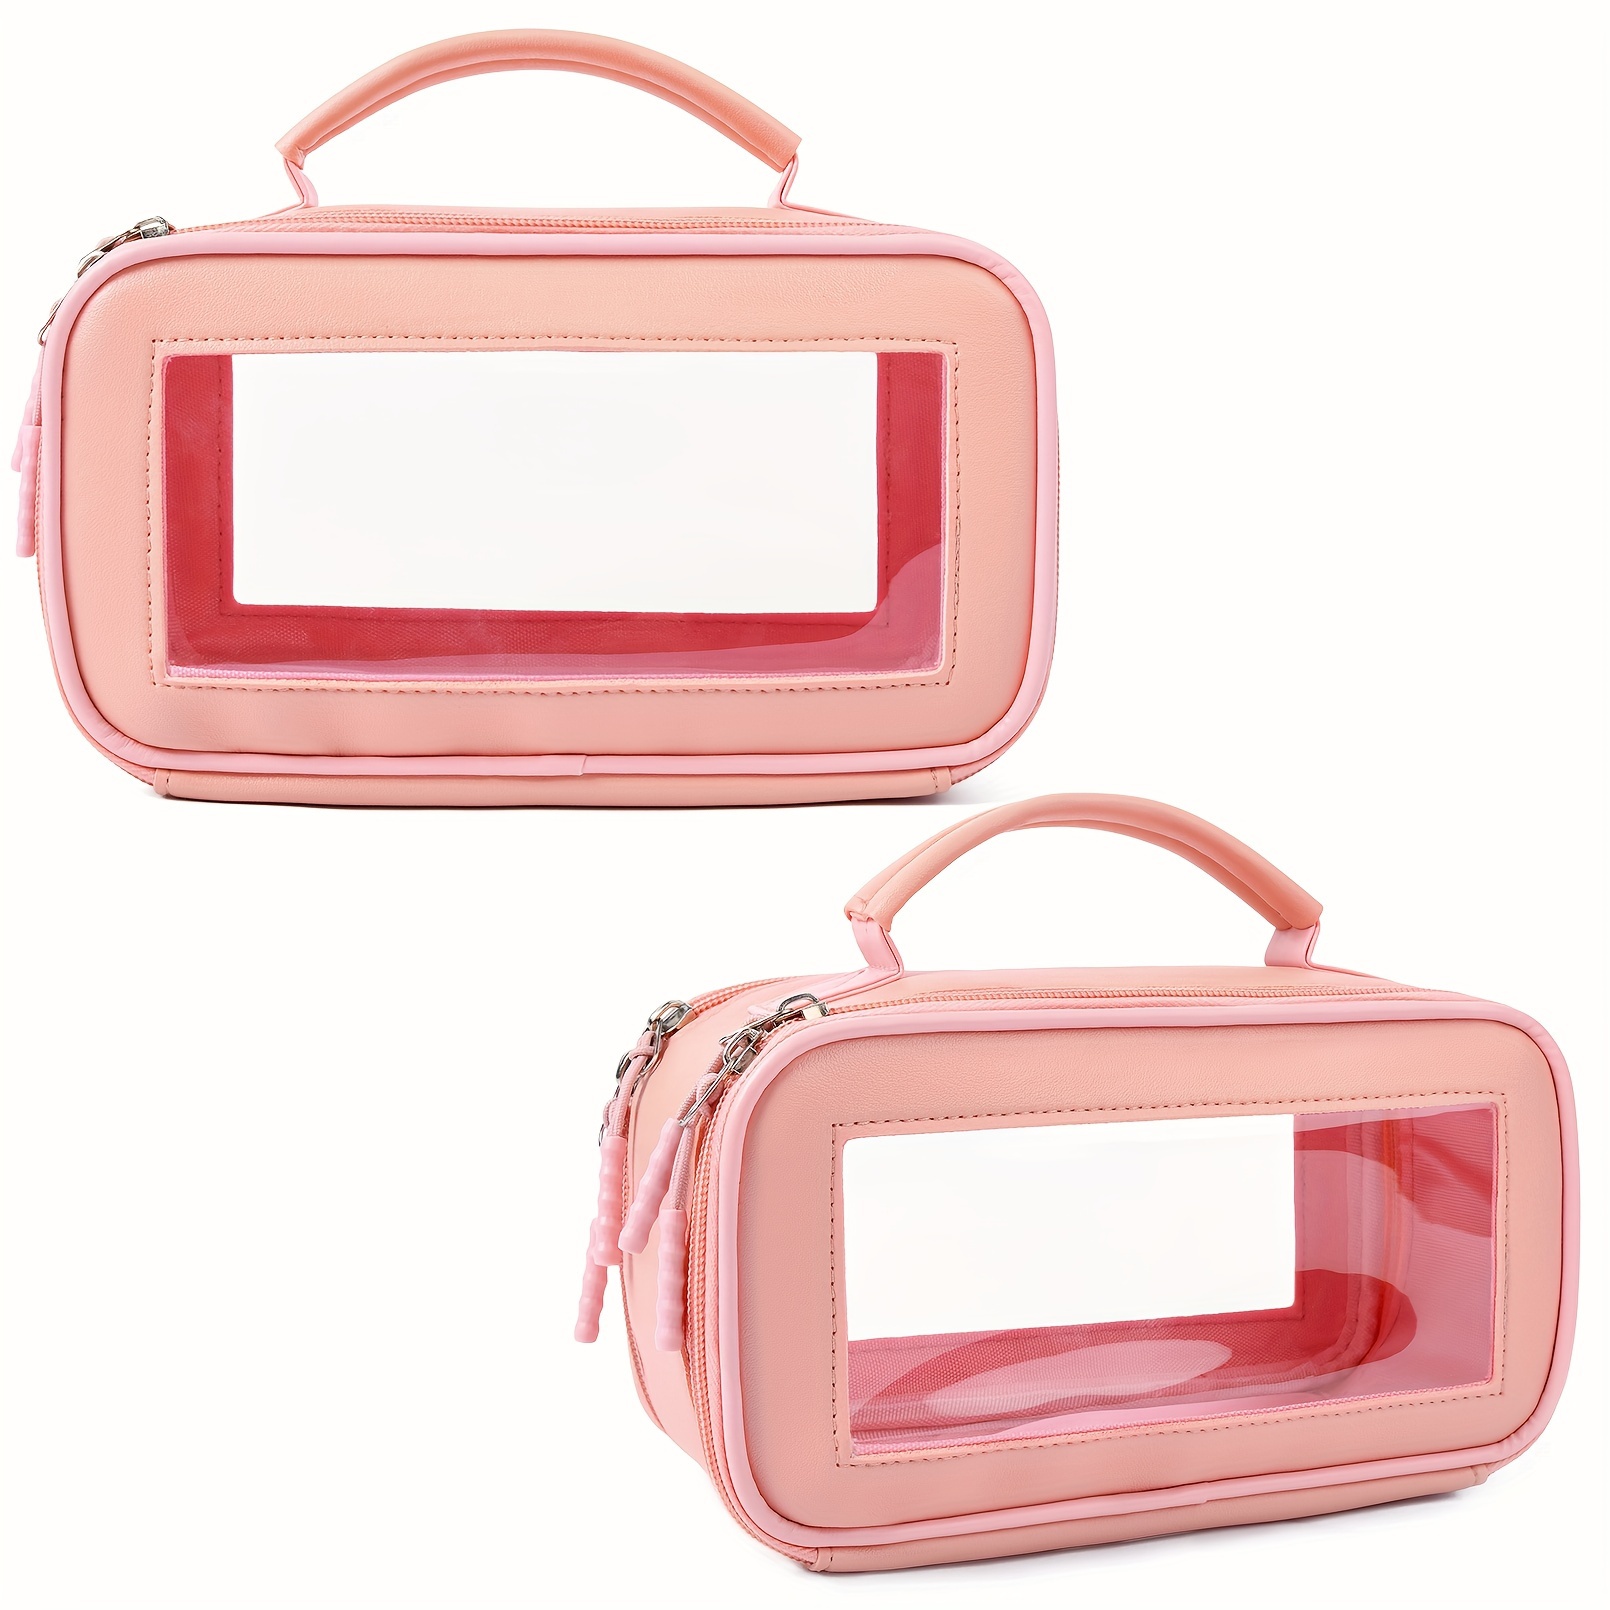 Minimalist Lightweight Makeup Bag For Travel, Versatile Toiletry Wash Bag For Women With Clear Window Valentine's Day gift